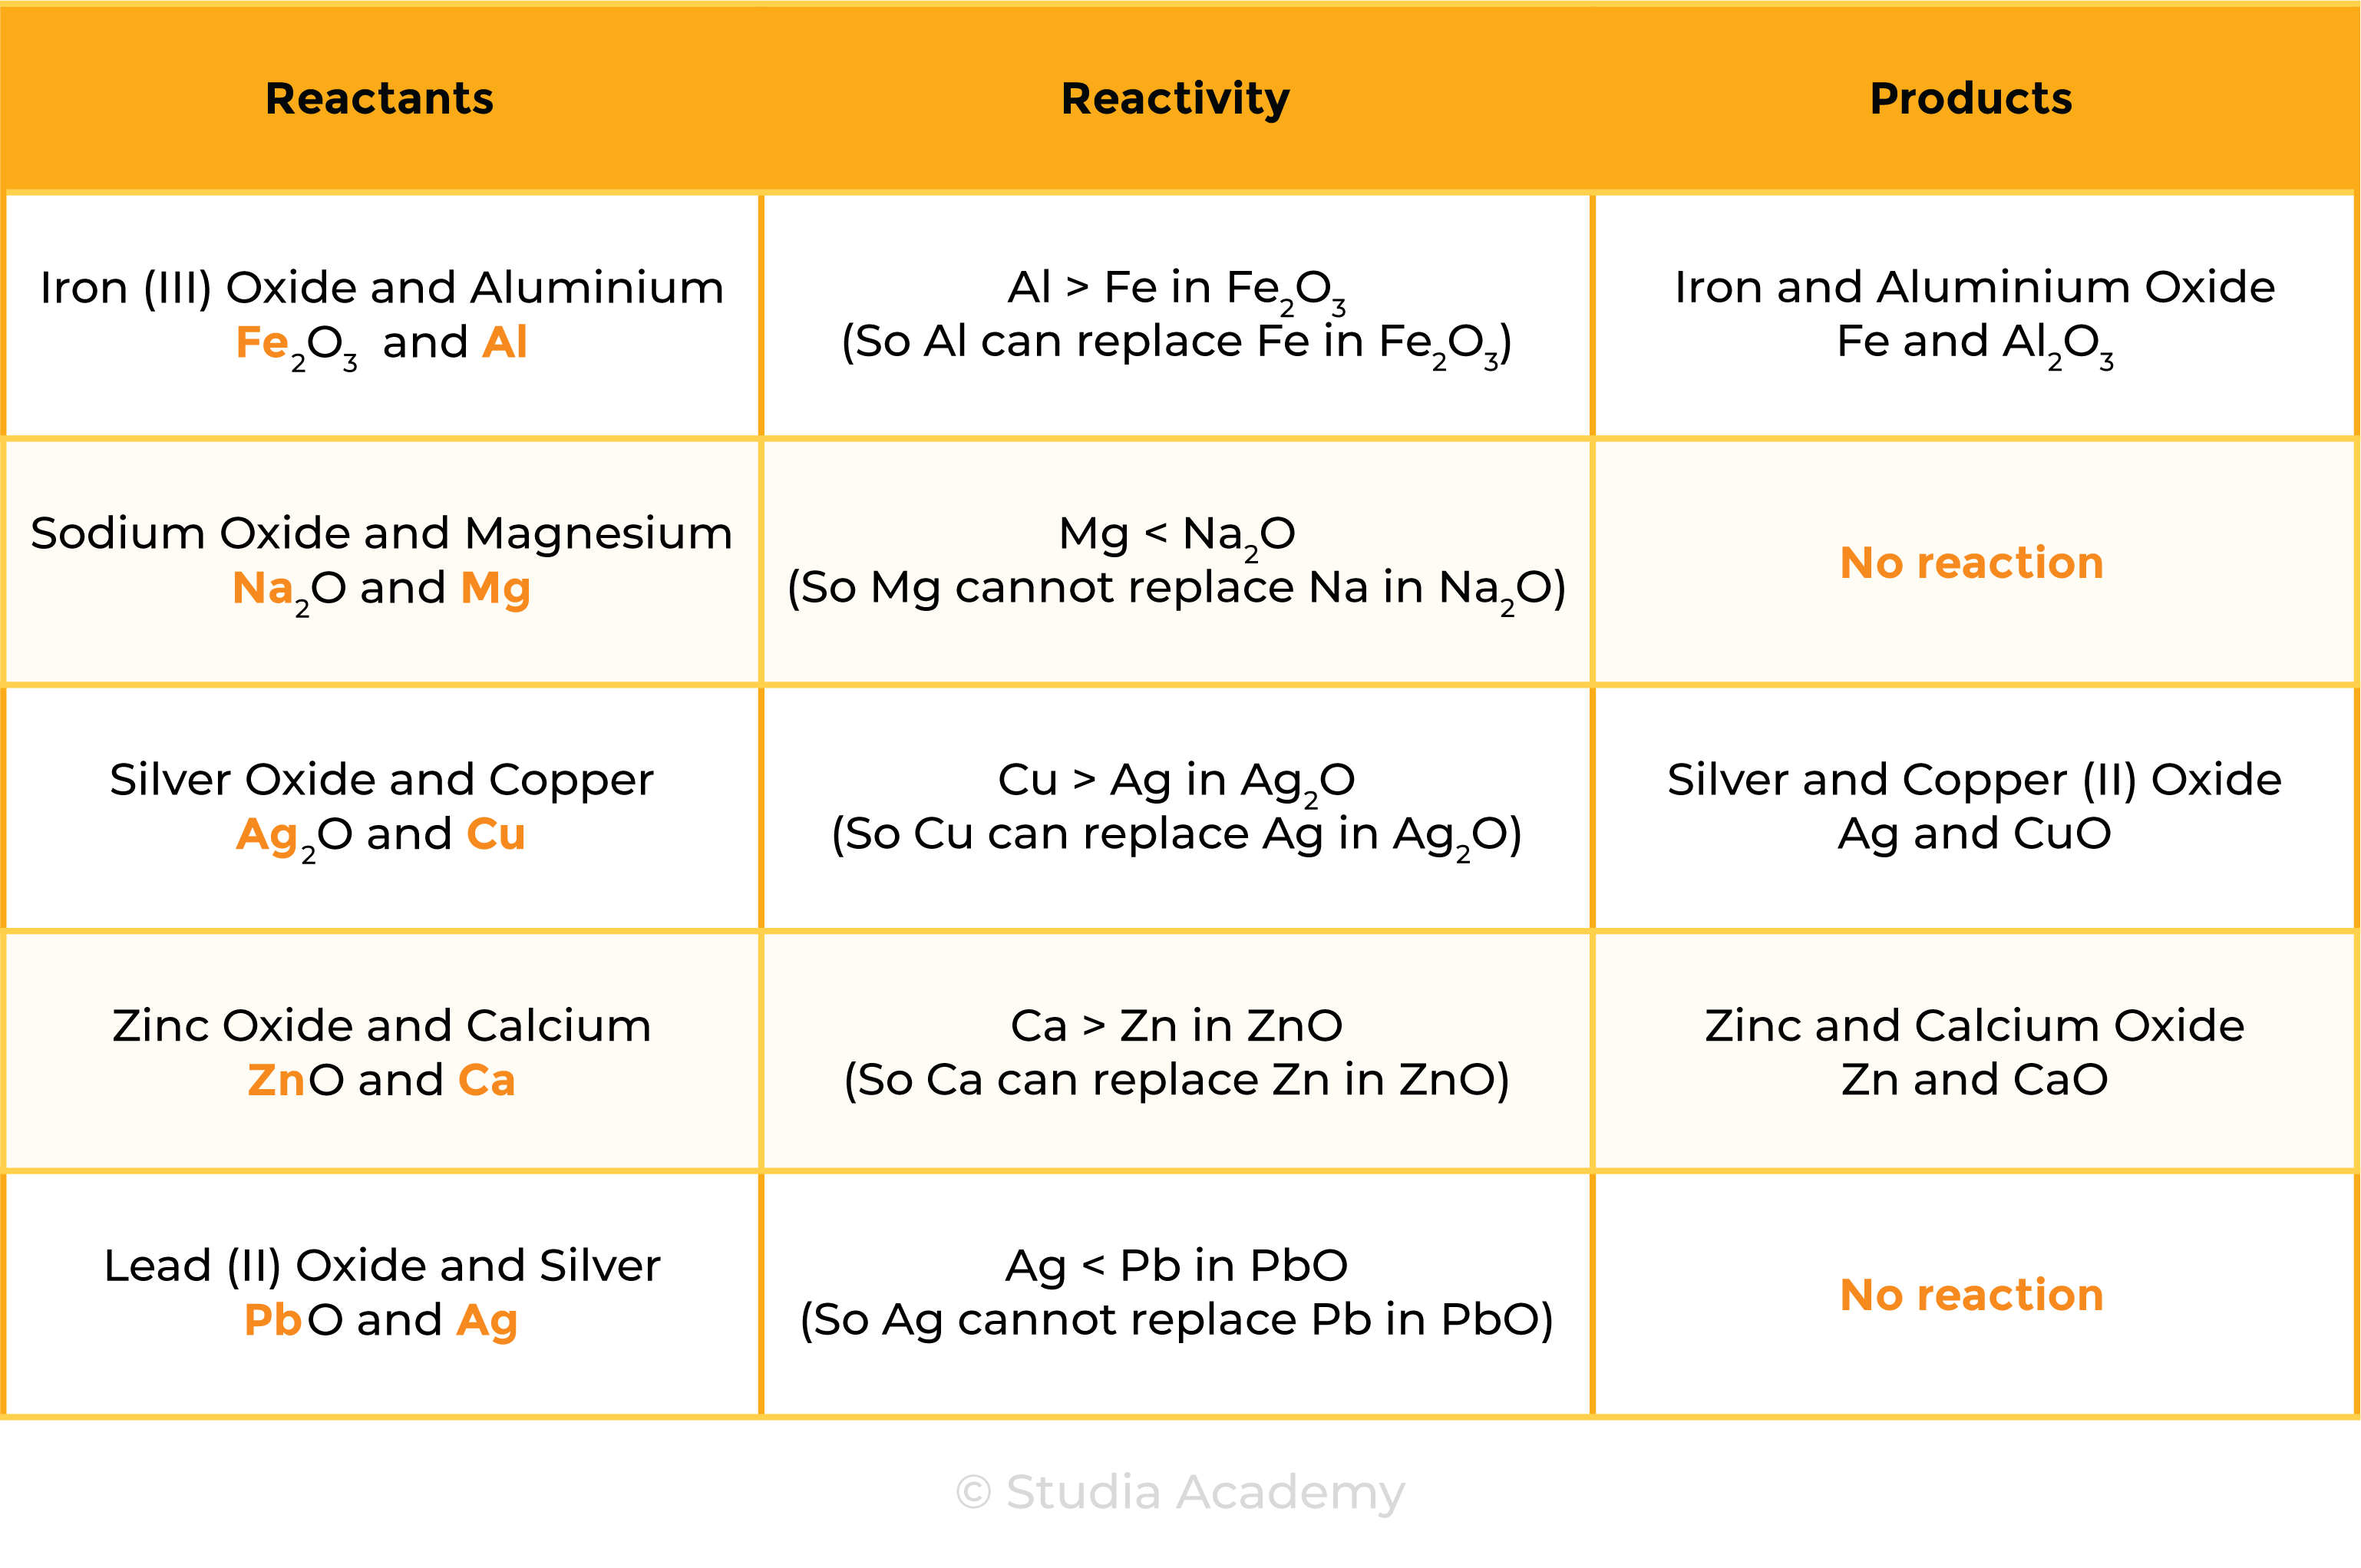 edexcel_igcse_chemistry_topic 13 tables_reactivity series_003_metal and metal oxide reaction examples